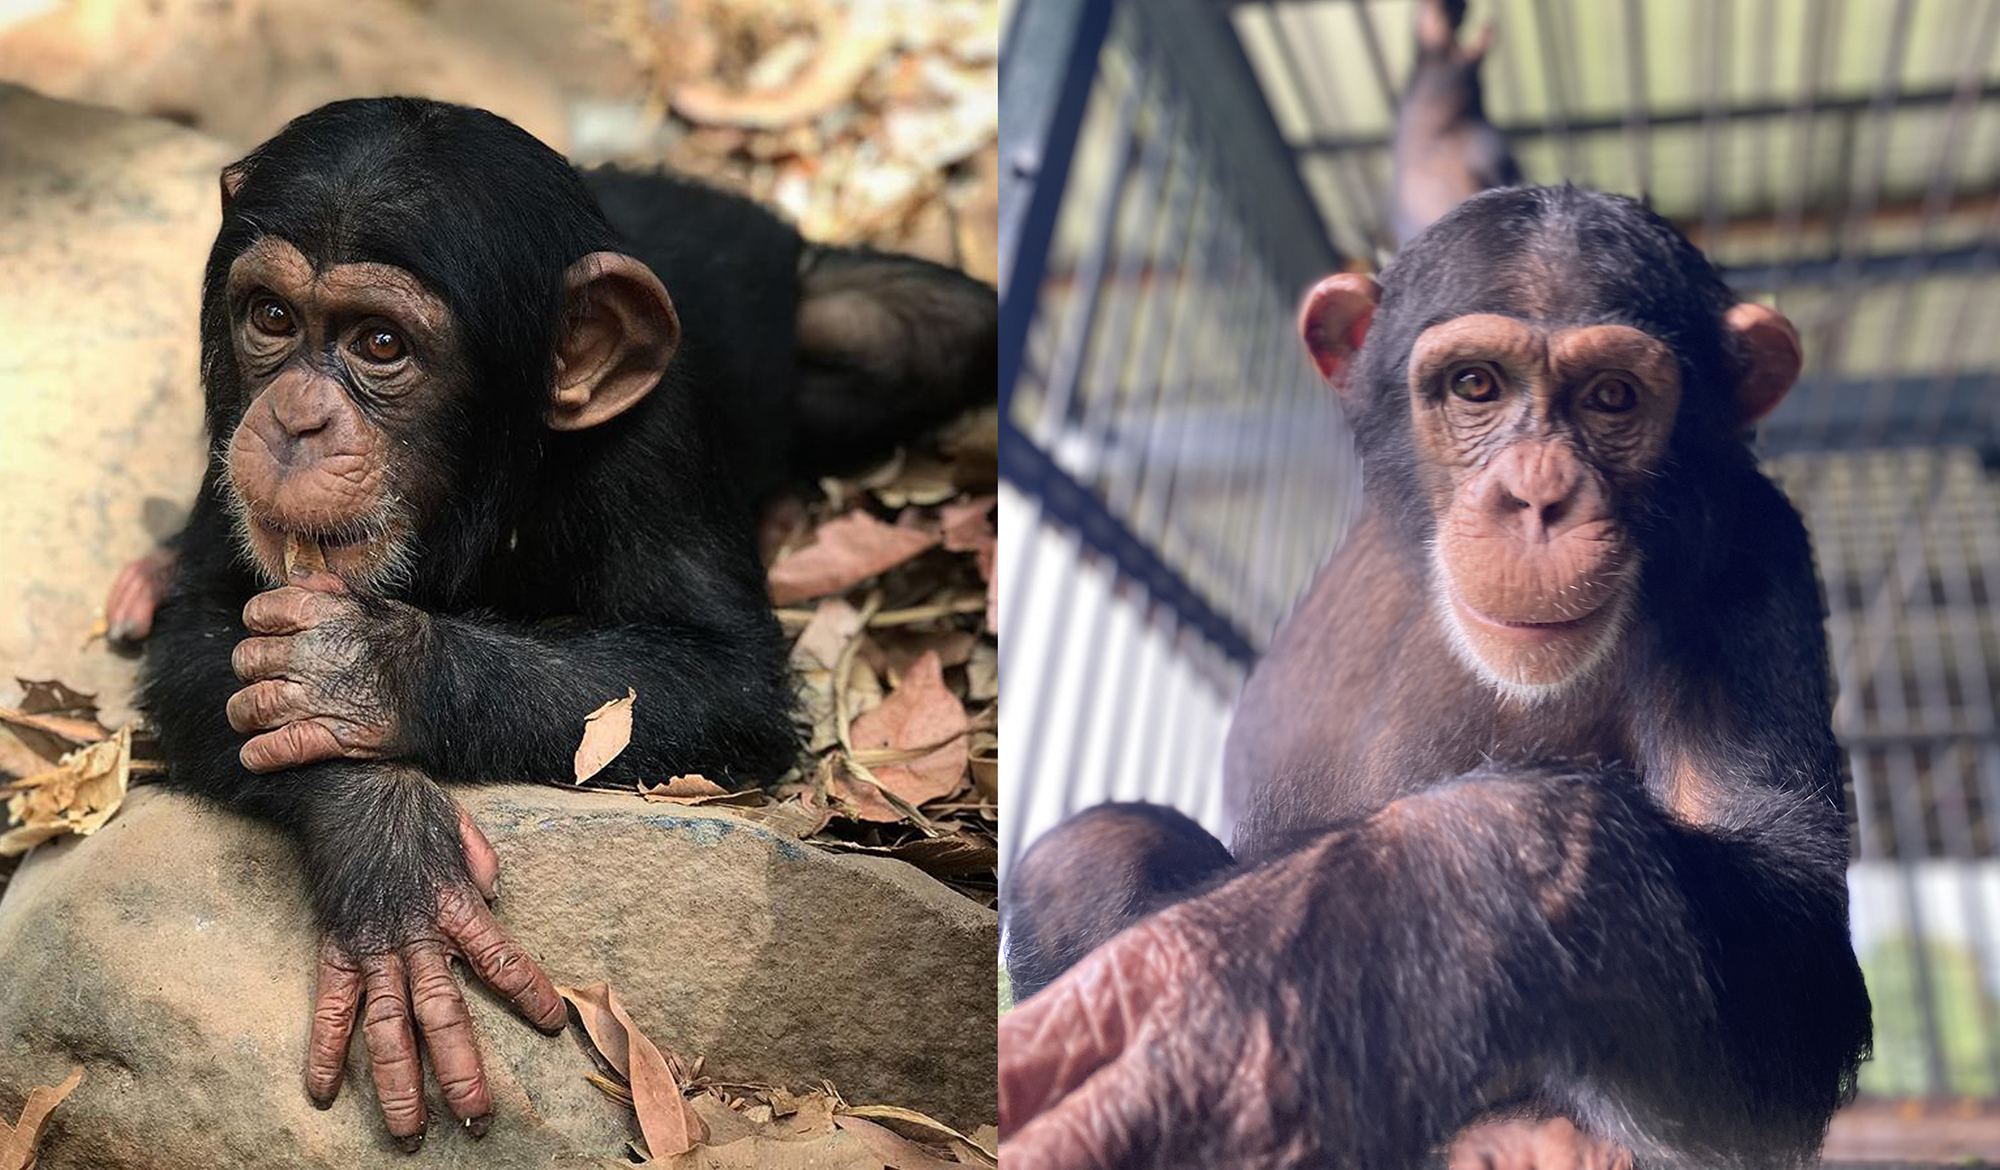 Montage of two photos of Simao as a young chimpanzee